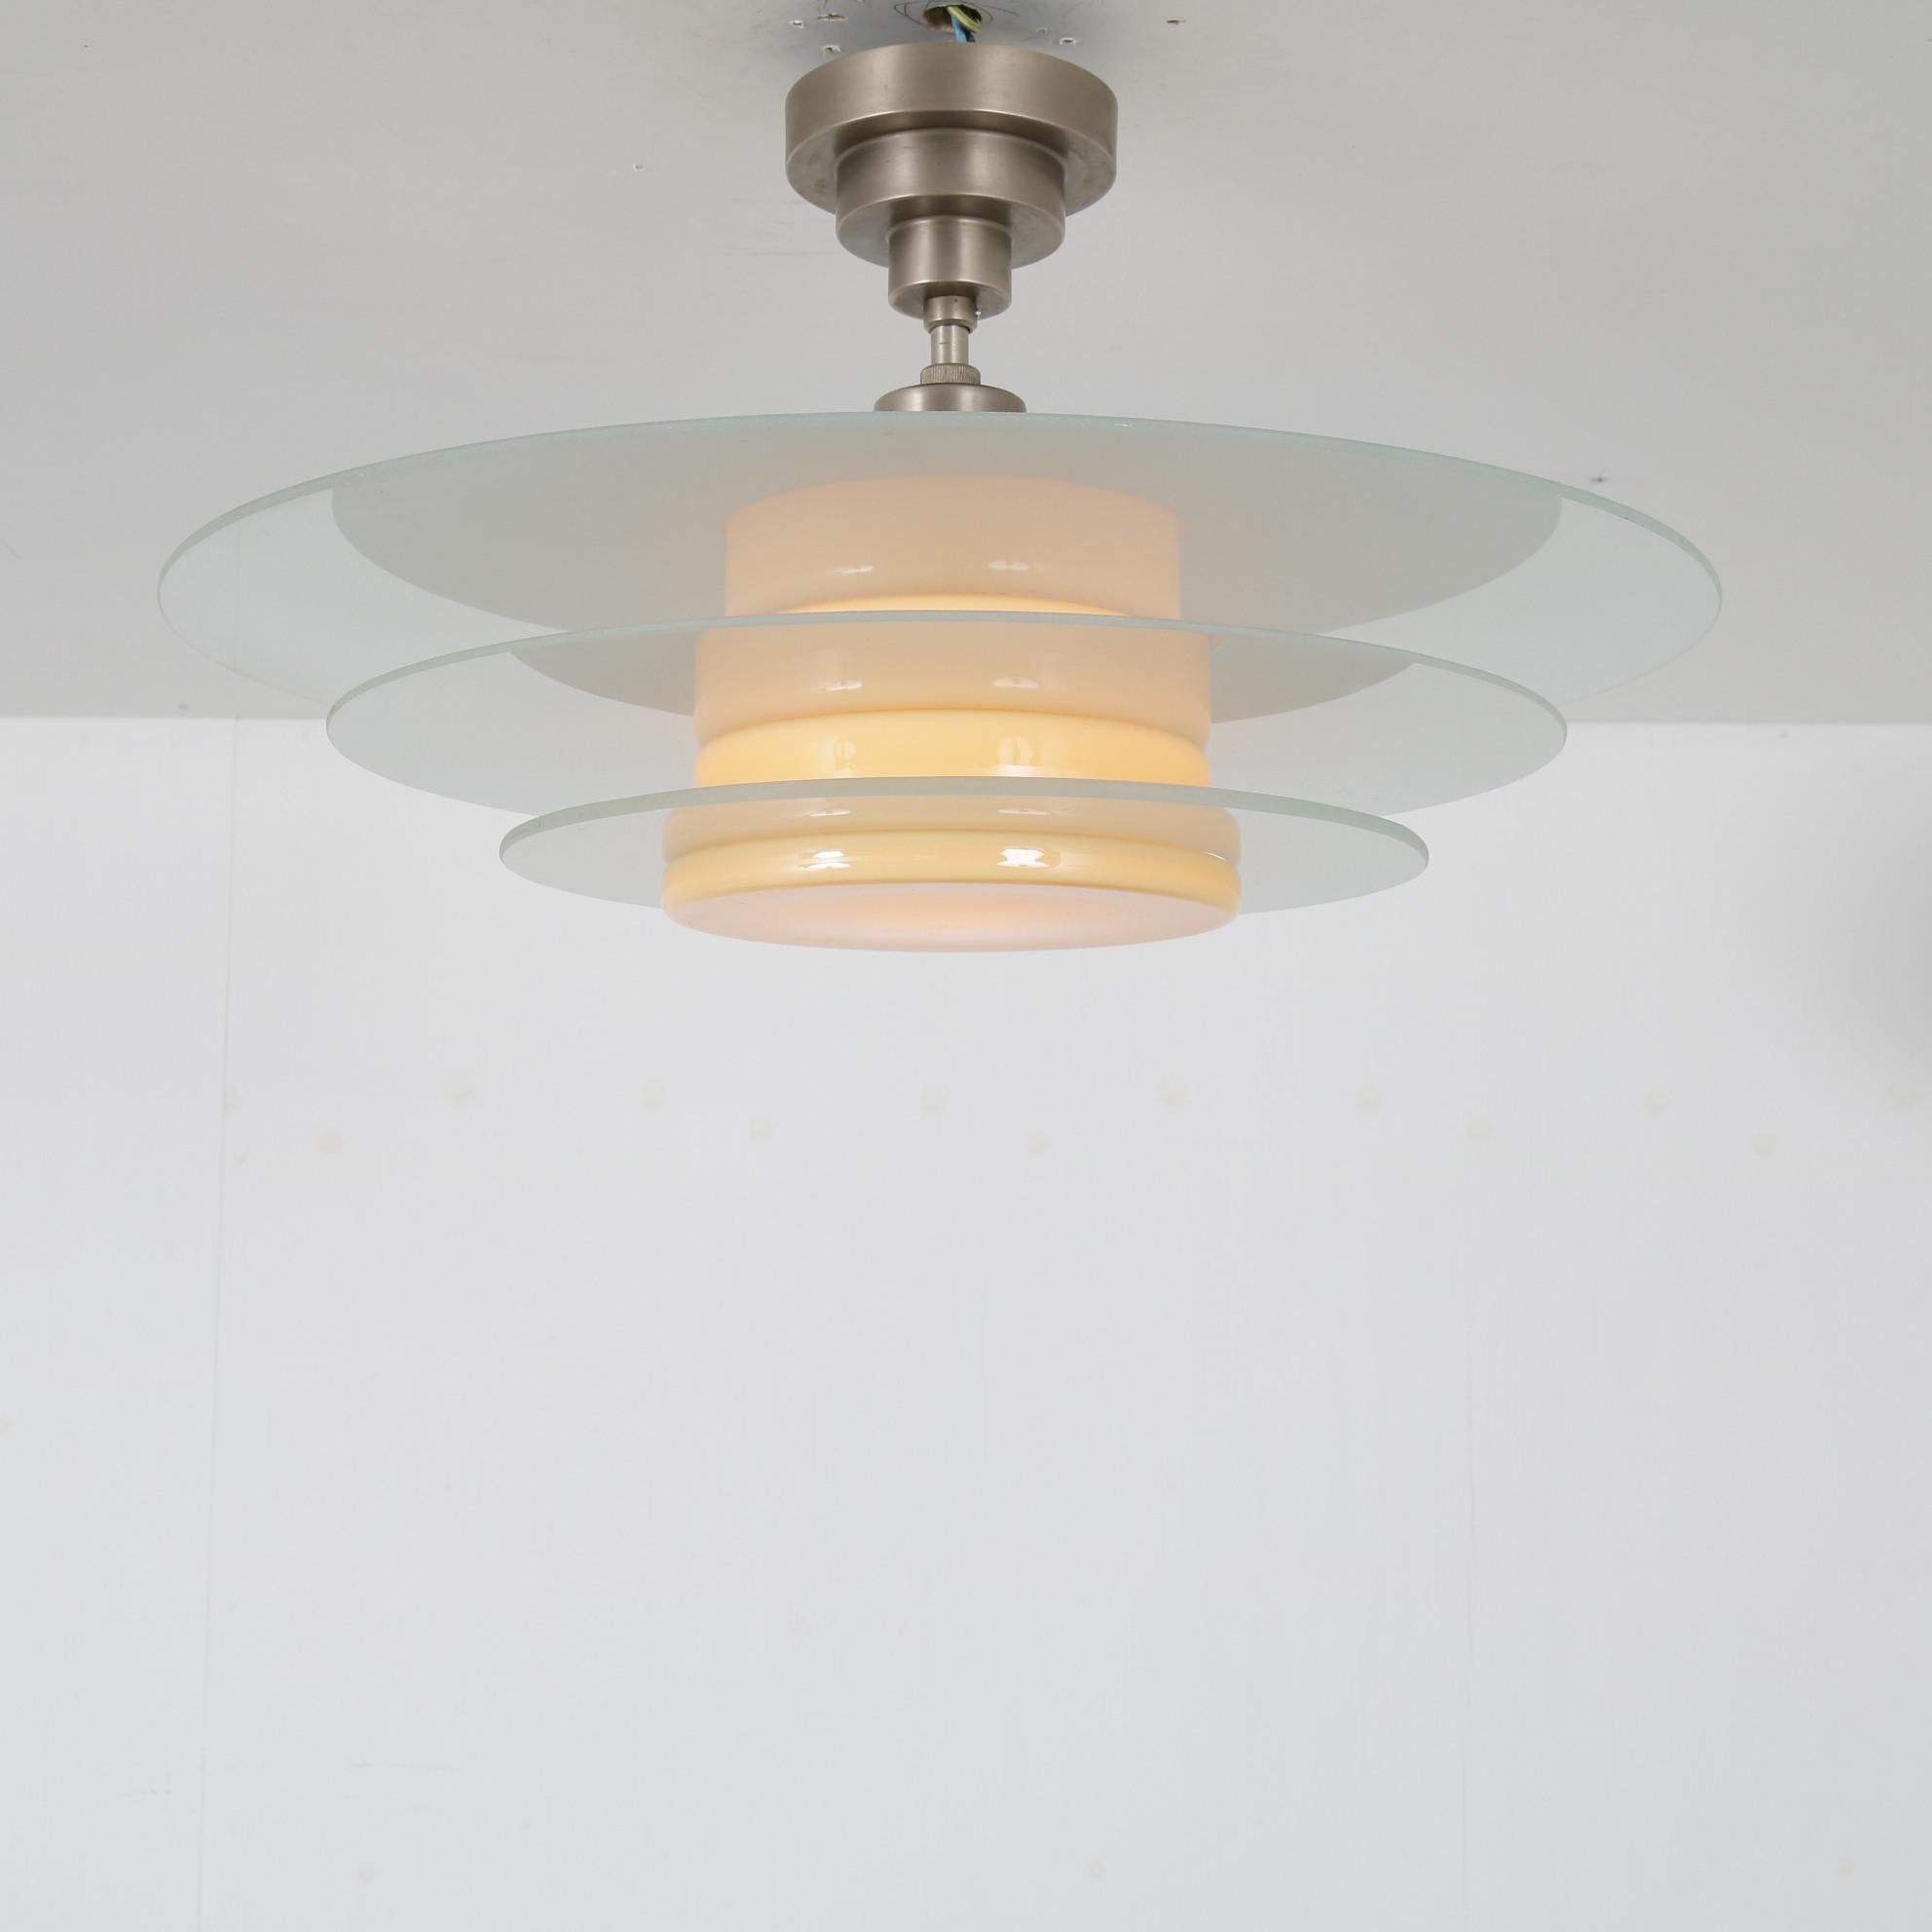 Mid-20th Century Bohlmarks Ceiling Lamp from Sweden, 1930 For Sale